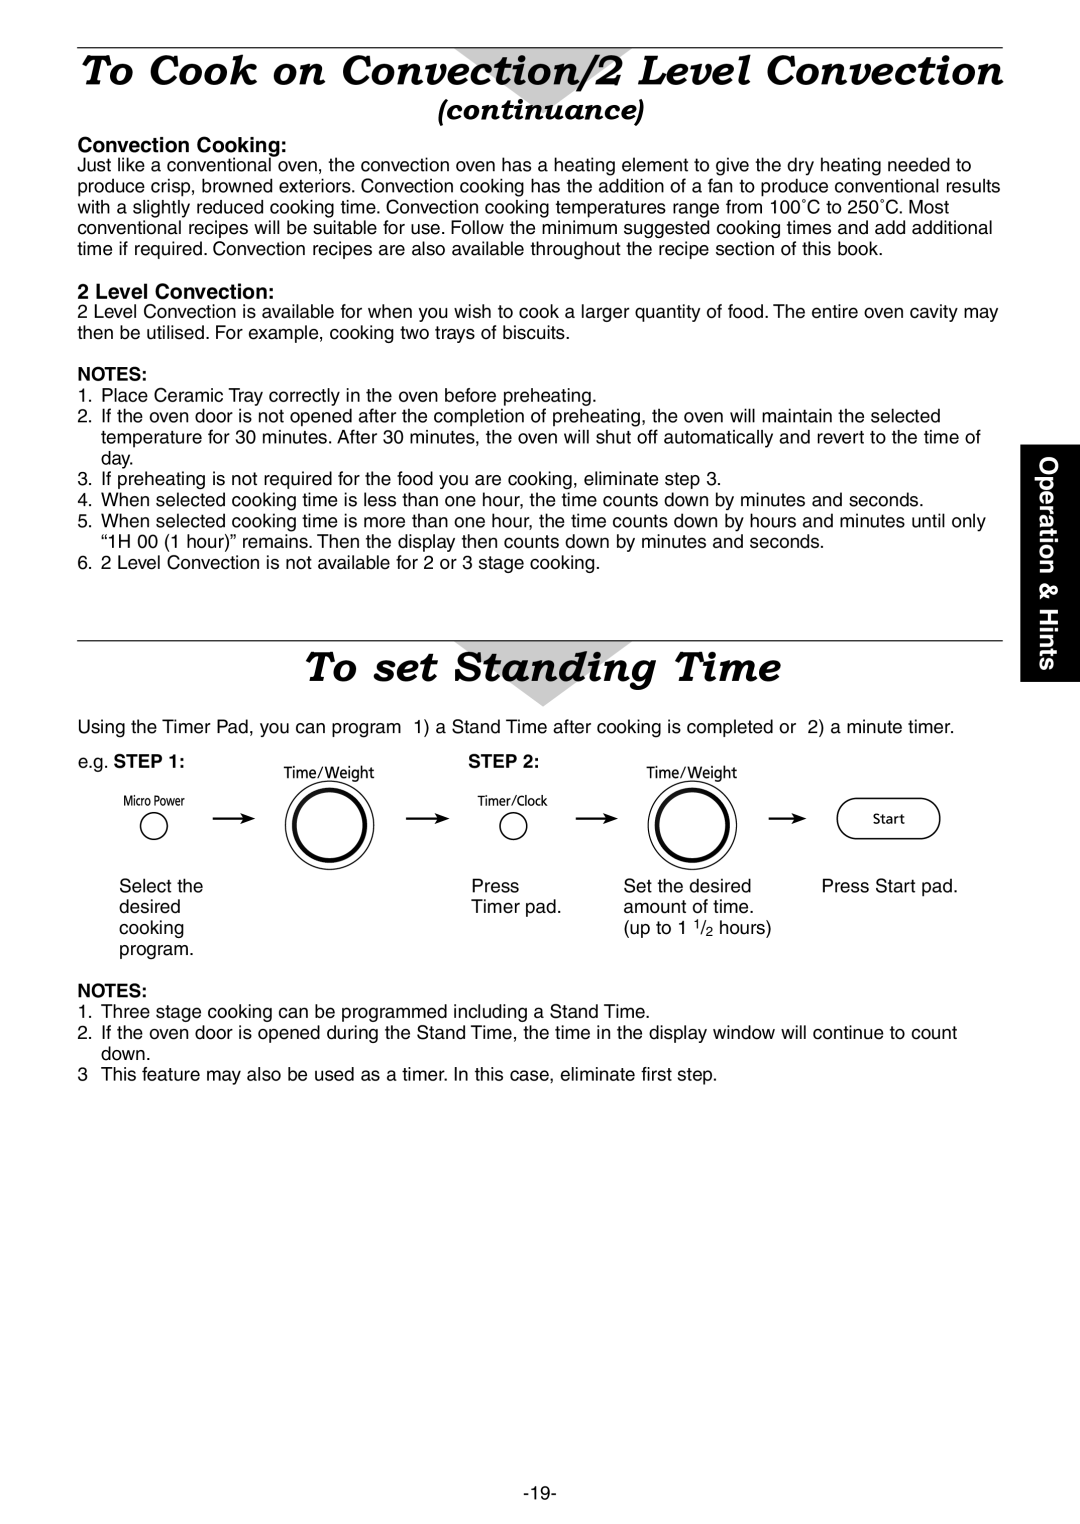 Panasonic NN-CD997S manual To set Standing Time, To Cook on Convection/2 Level Convection, continuance, Operation & Hints 